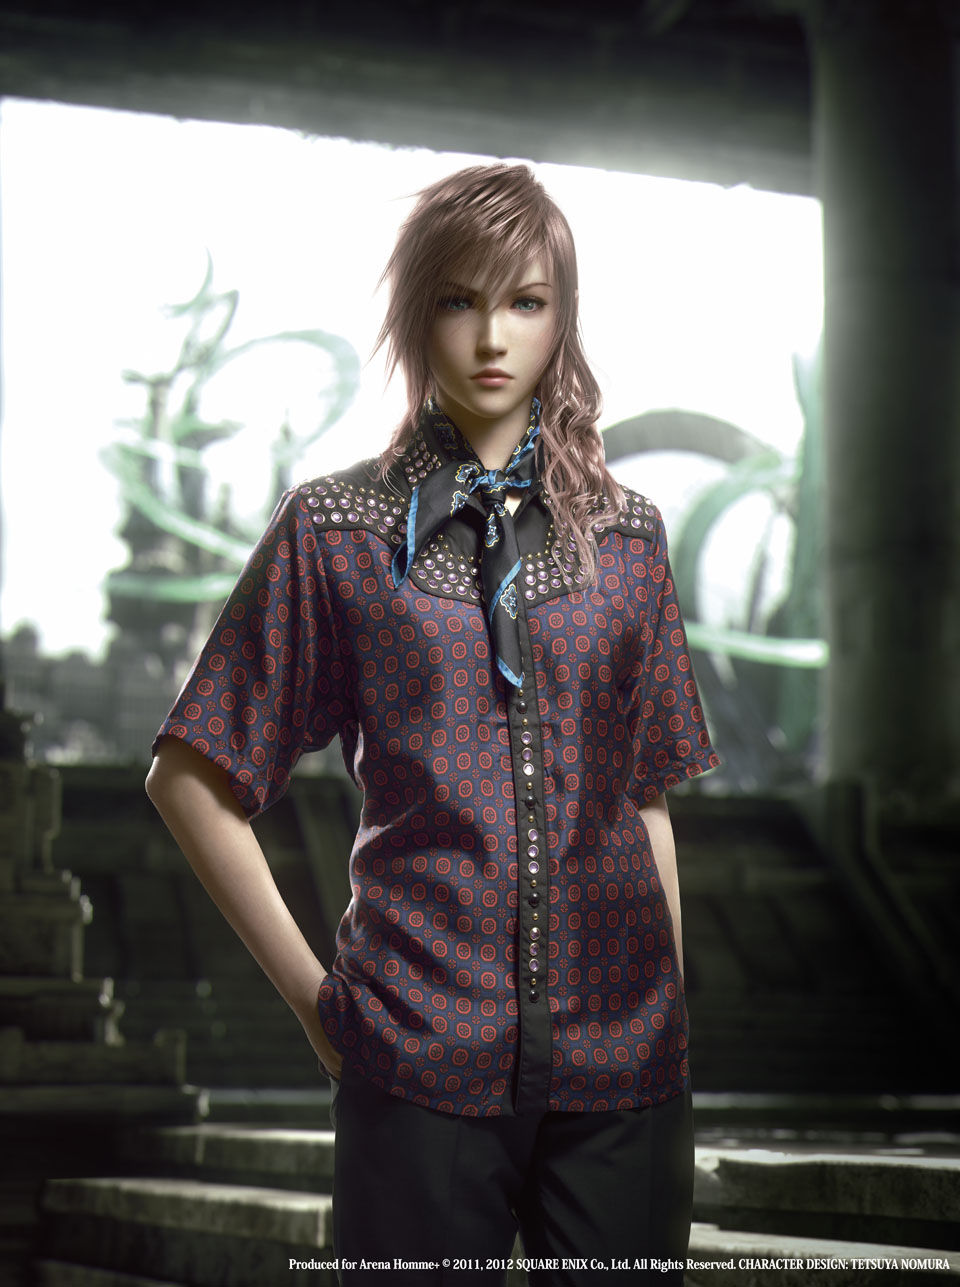 FINAL FANTASY XIII-3 IS IN THE WORKS?